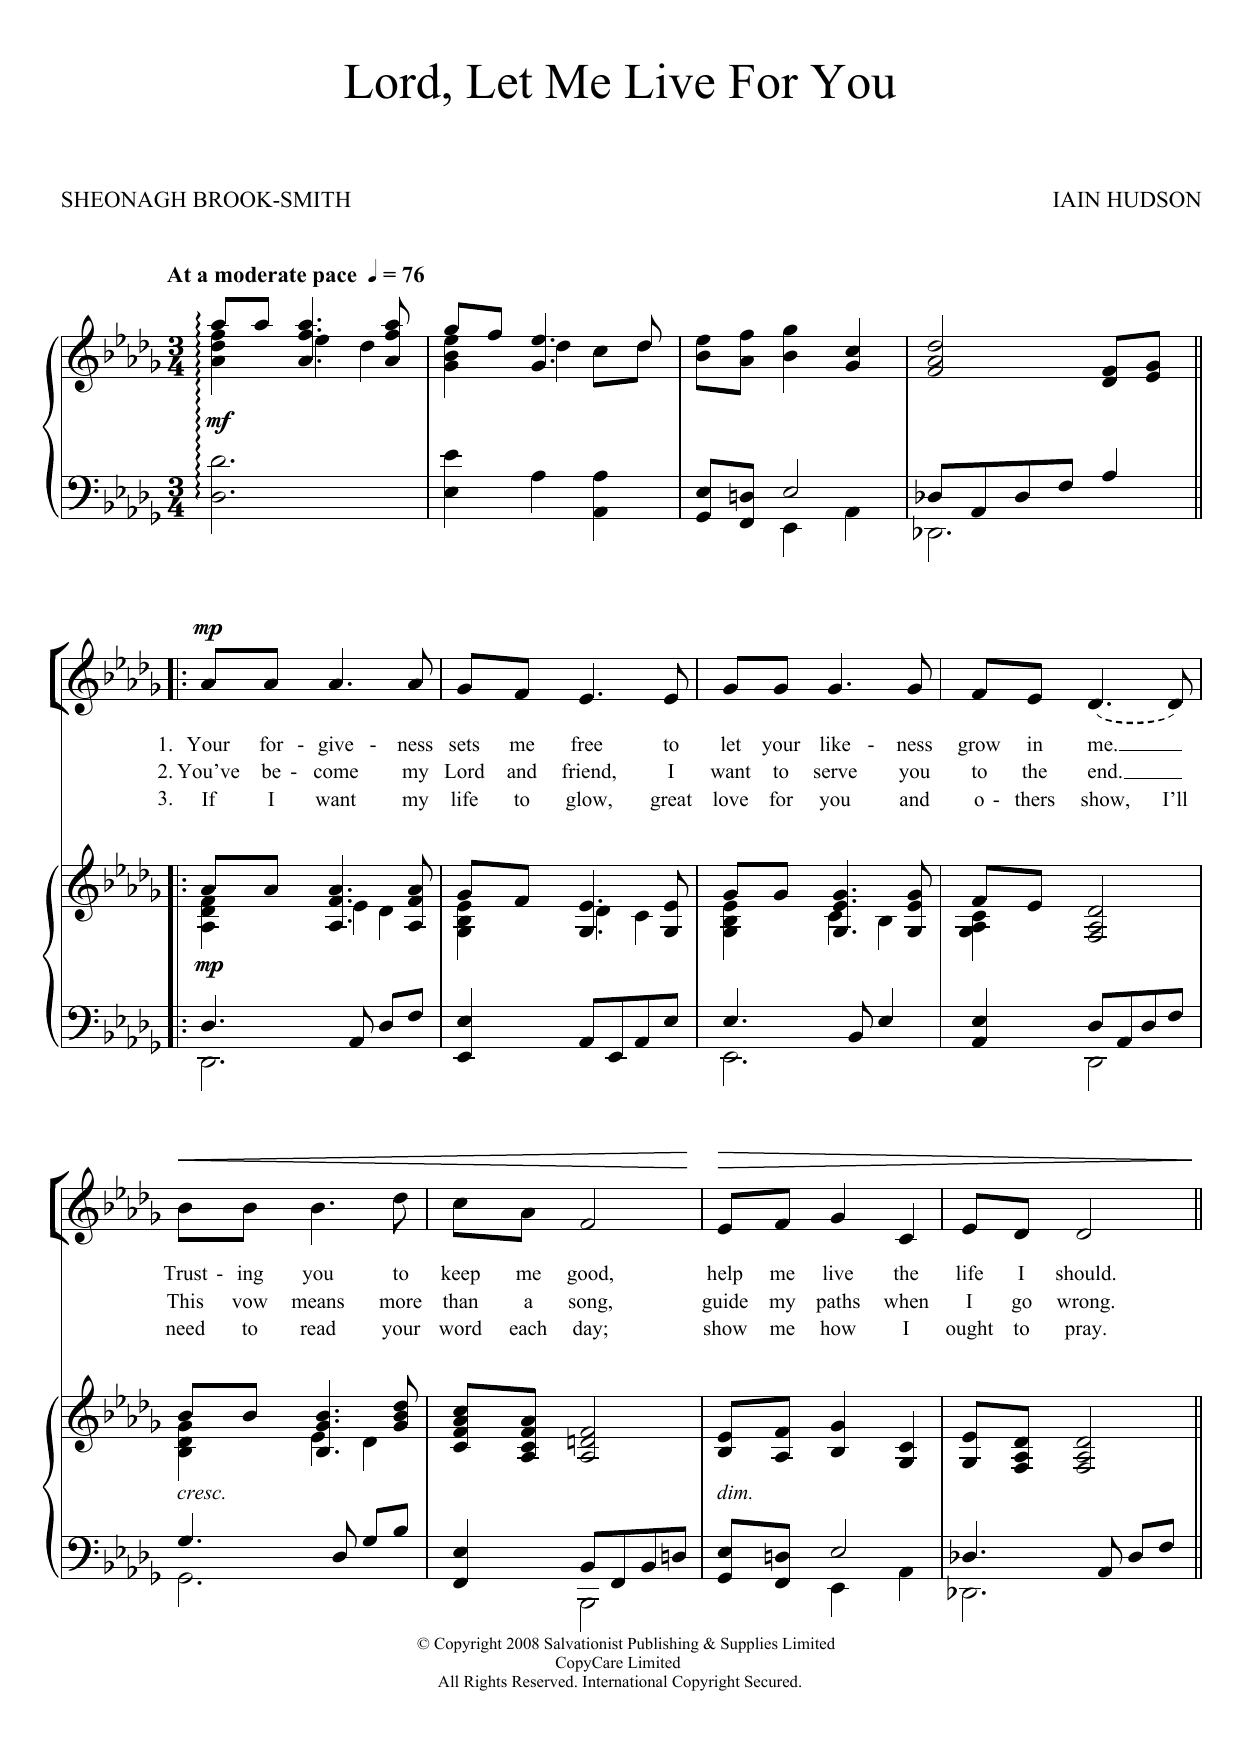 Download The Salvation Army Lord, Let Me Live For You Sheet Music